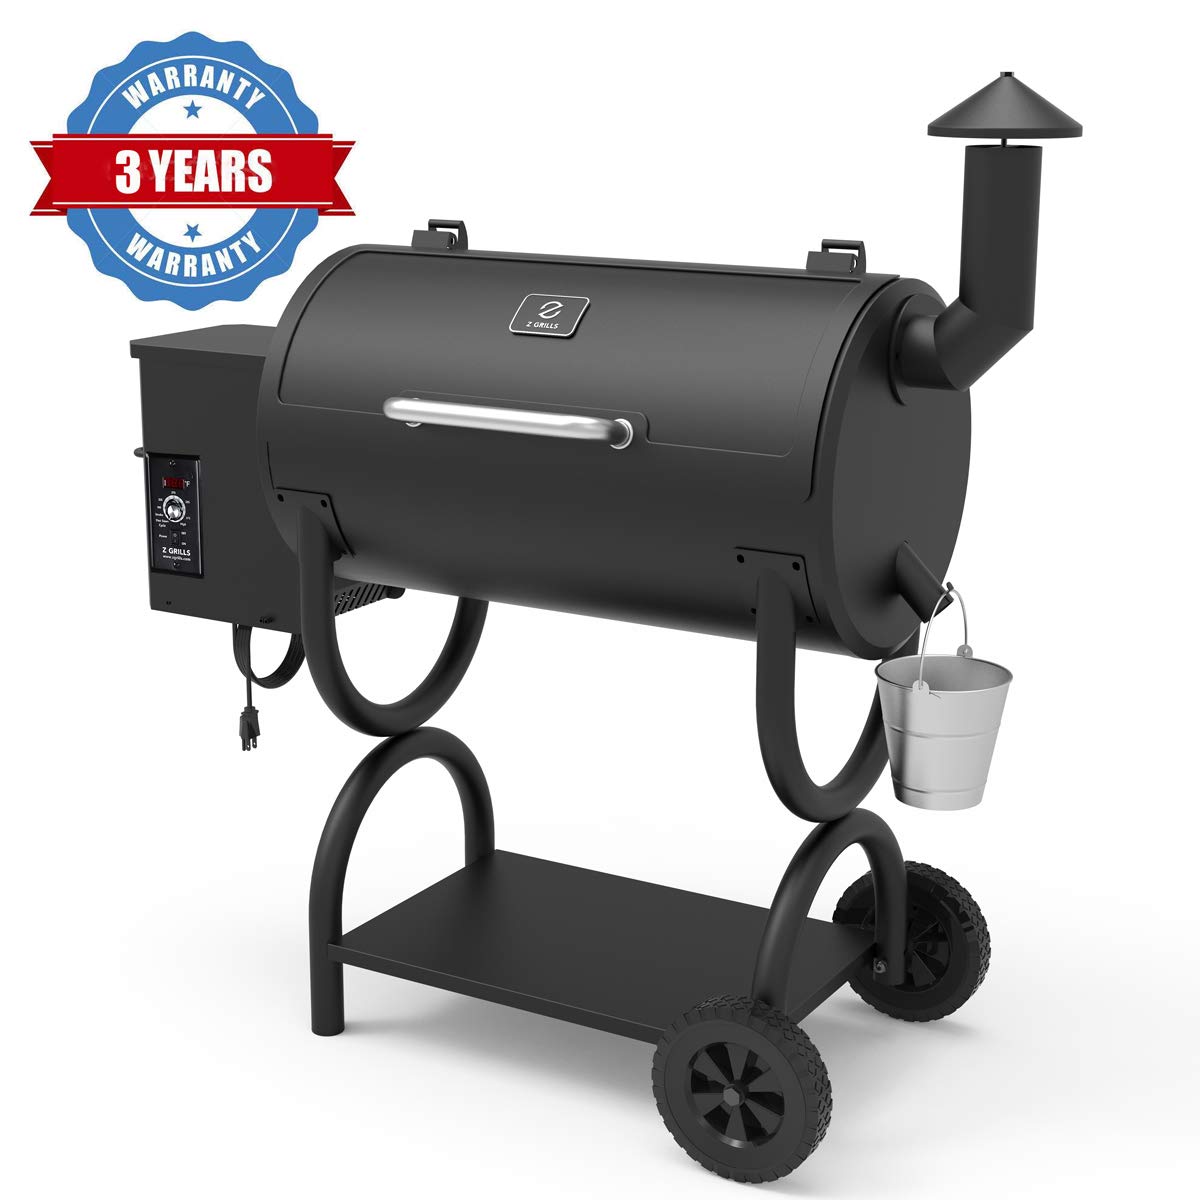 Z GRILLS ZPG 550B 2020 Upgrade Wood Pellet Grill Smoker 8 in 1 BBQ Grill Auto Temperature Control 550 sq 538sq in Black - image 1 of 10